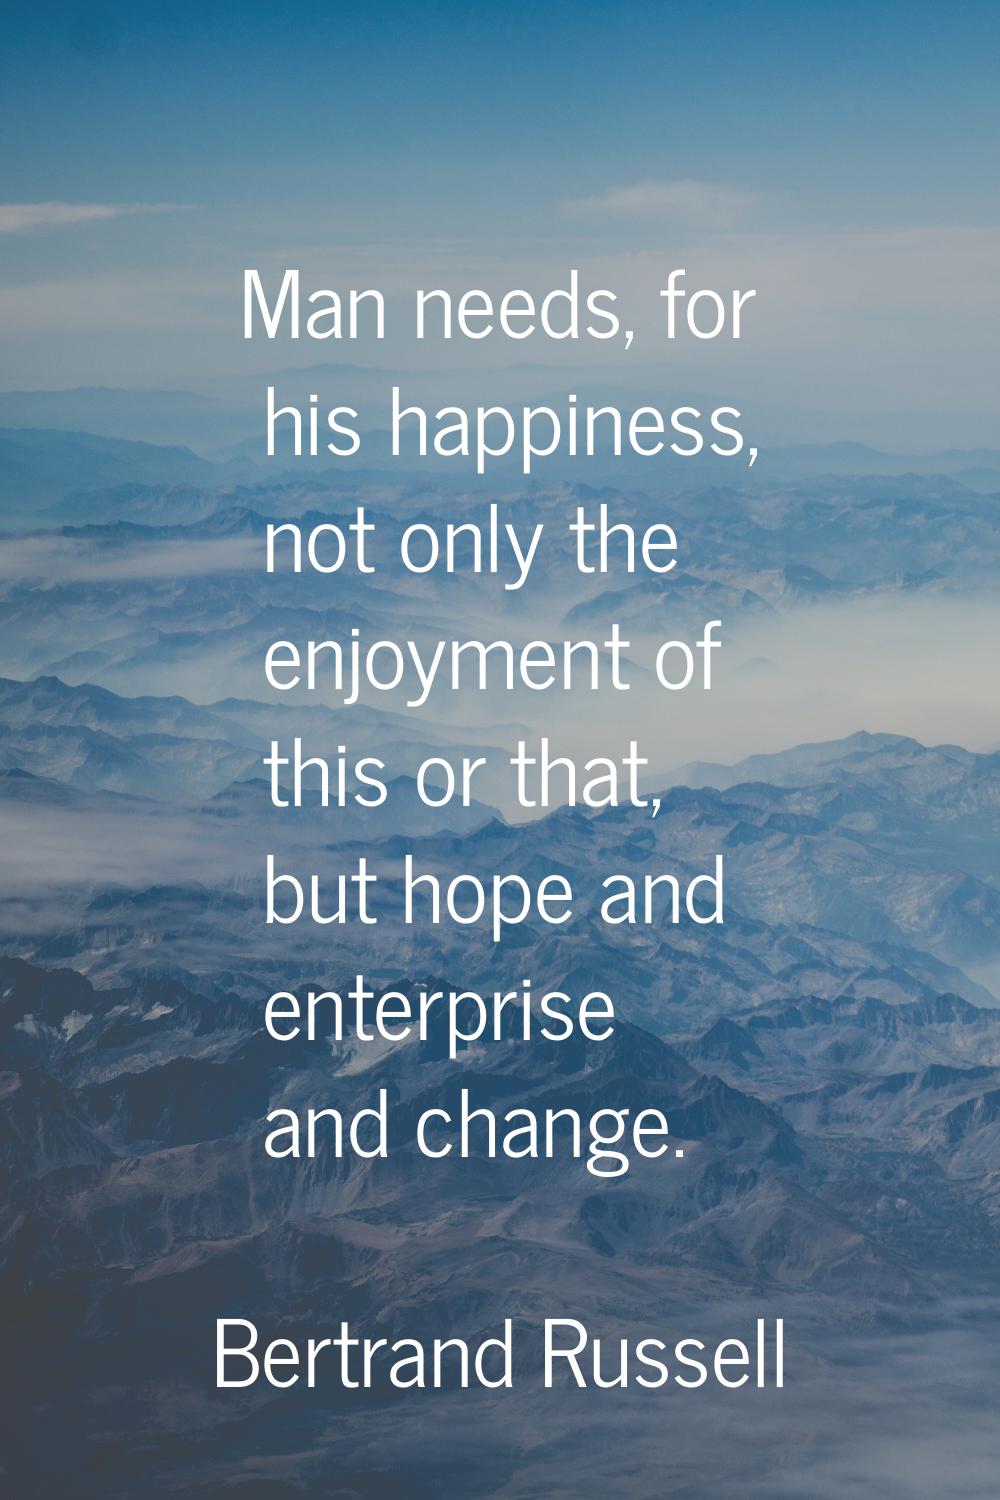 Man needs, for his happiness, not only the enjoyment of this or that, but hope and enterprise and c